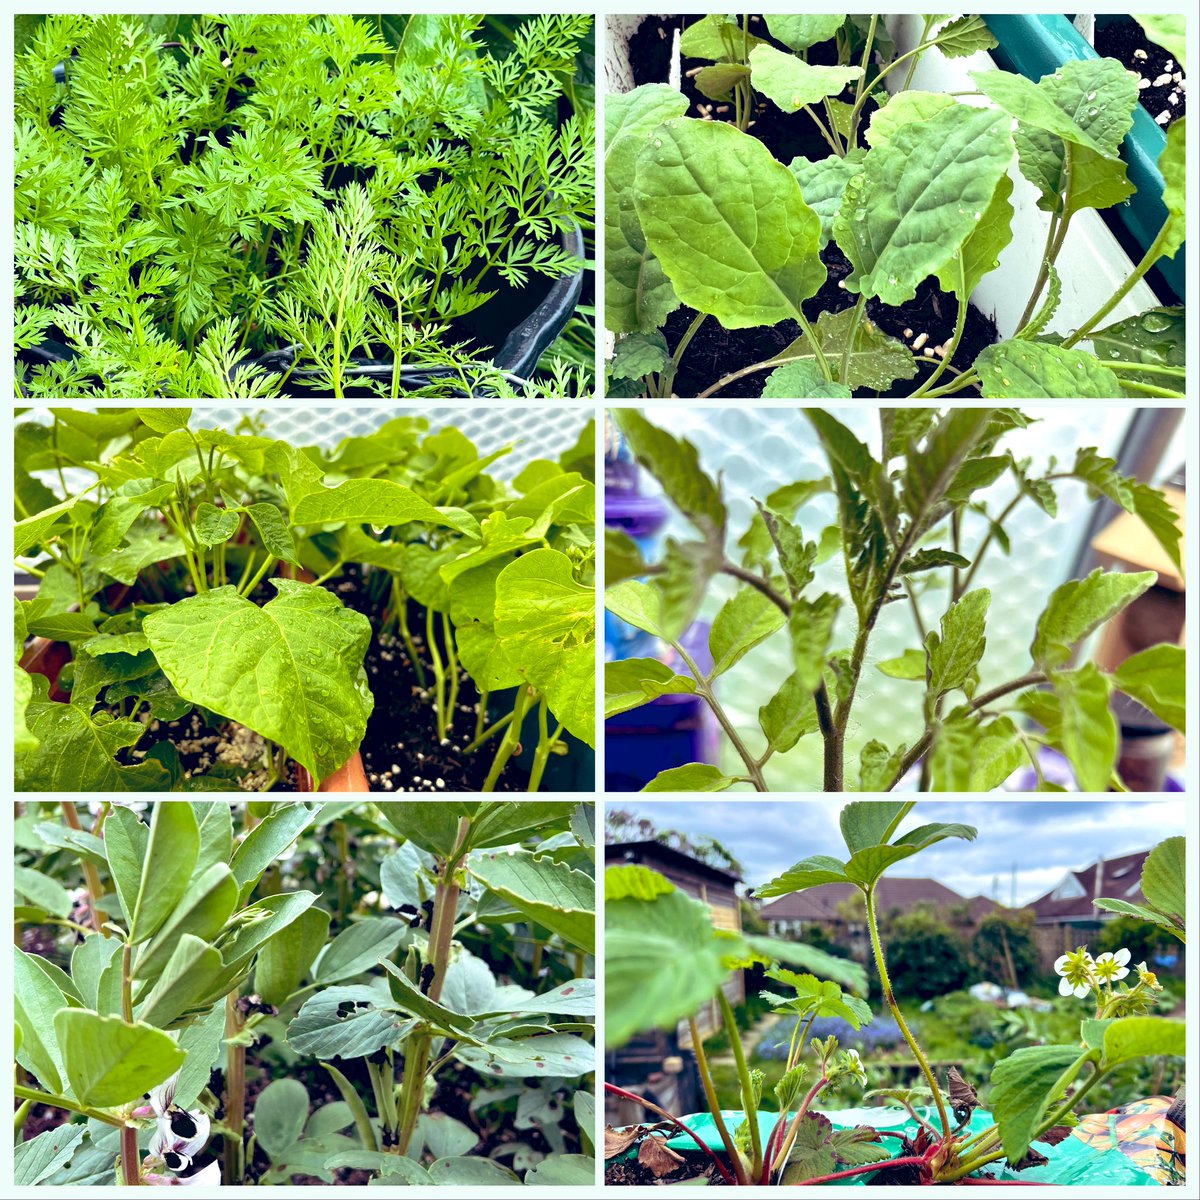 This weather is difficult for veggie growing. All over the place. Runner,  Borlotti & French 🫘 desperate to go out, growing fast #peatfree inside. Tomatoes too but nights still chilly. Cavalo Nero def. going out today. Meanwhile #strawberries in flower & baby beans on the Broads